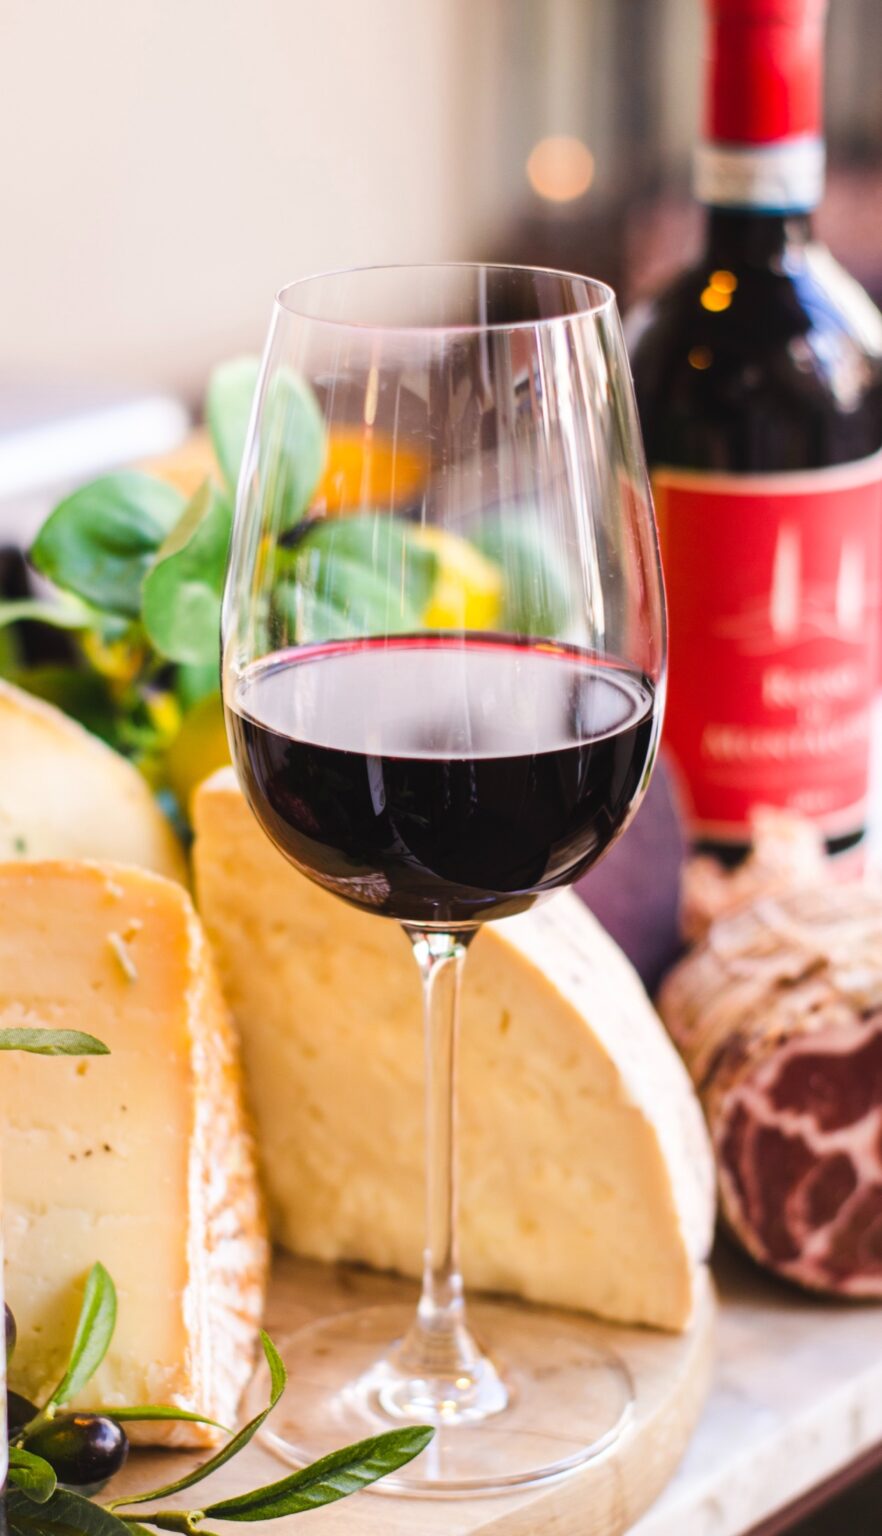 A glass of red wine on a meat and cheese tray